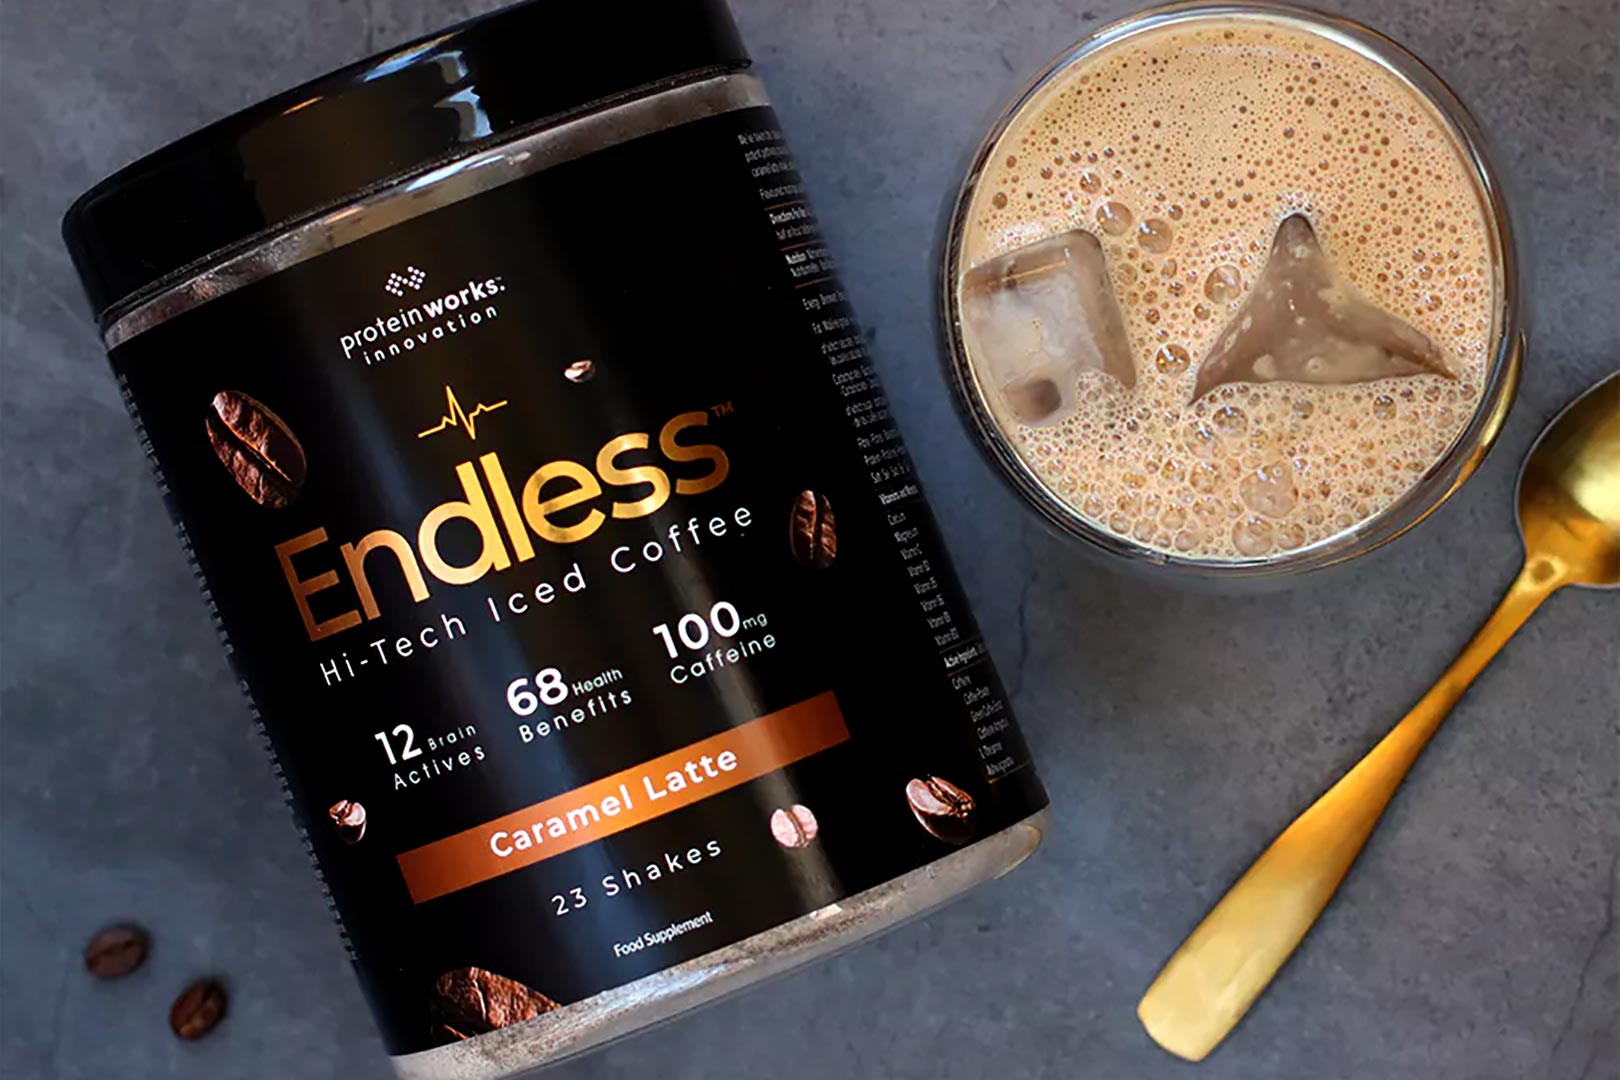 Protein Works suprcharges your morning coffee with Endless